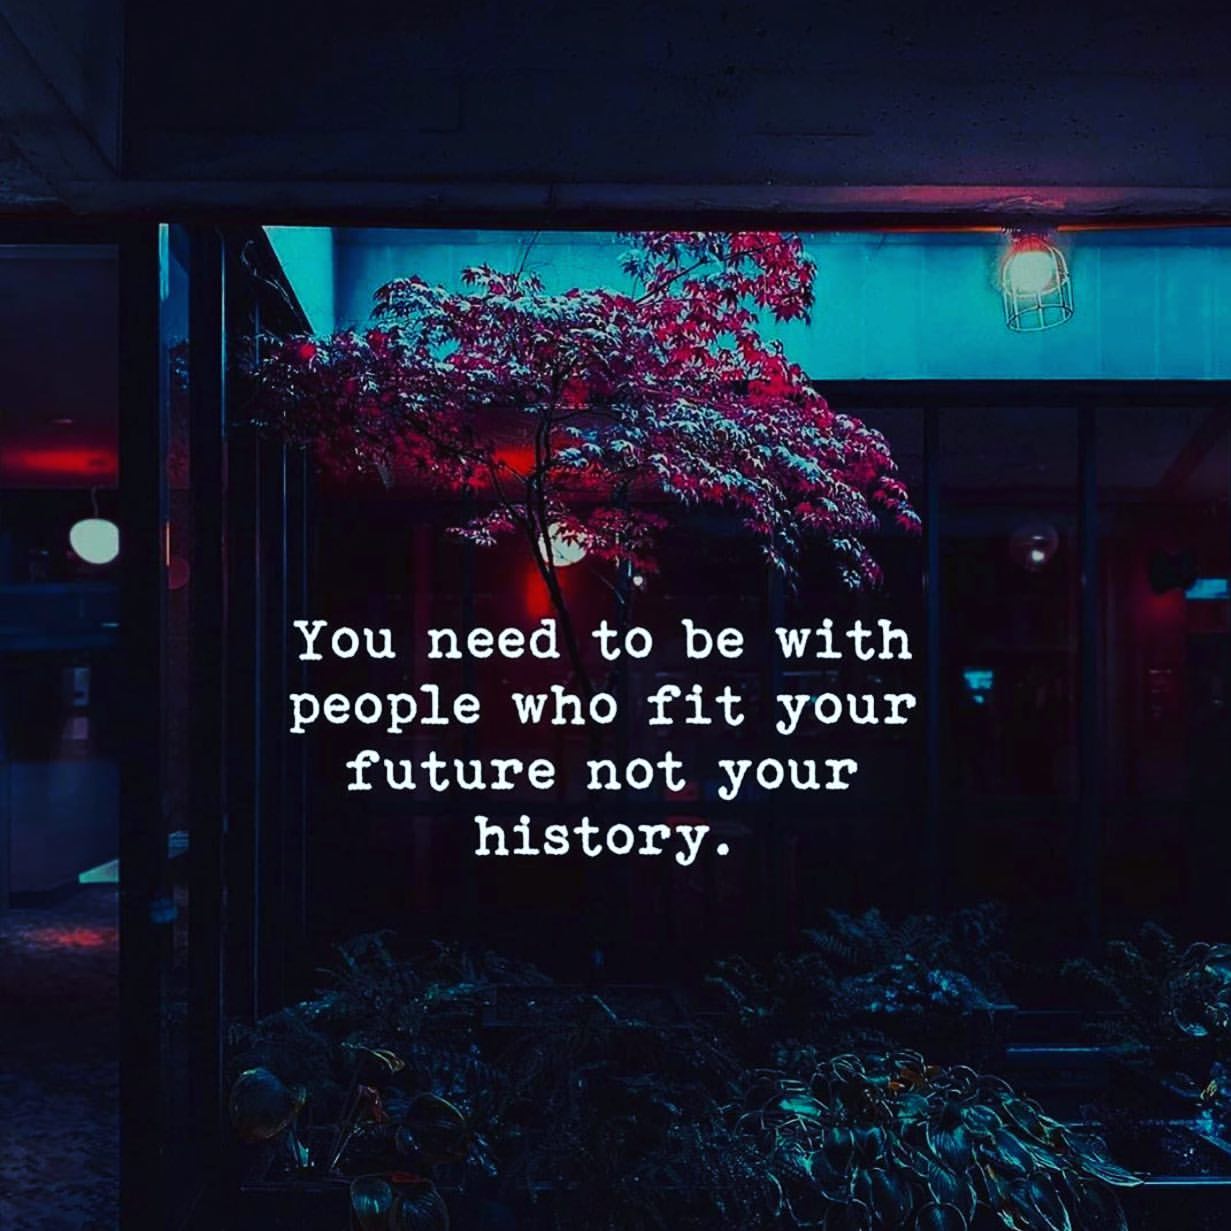 You need to be with people who fit your future not your history.